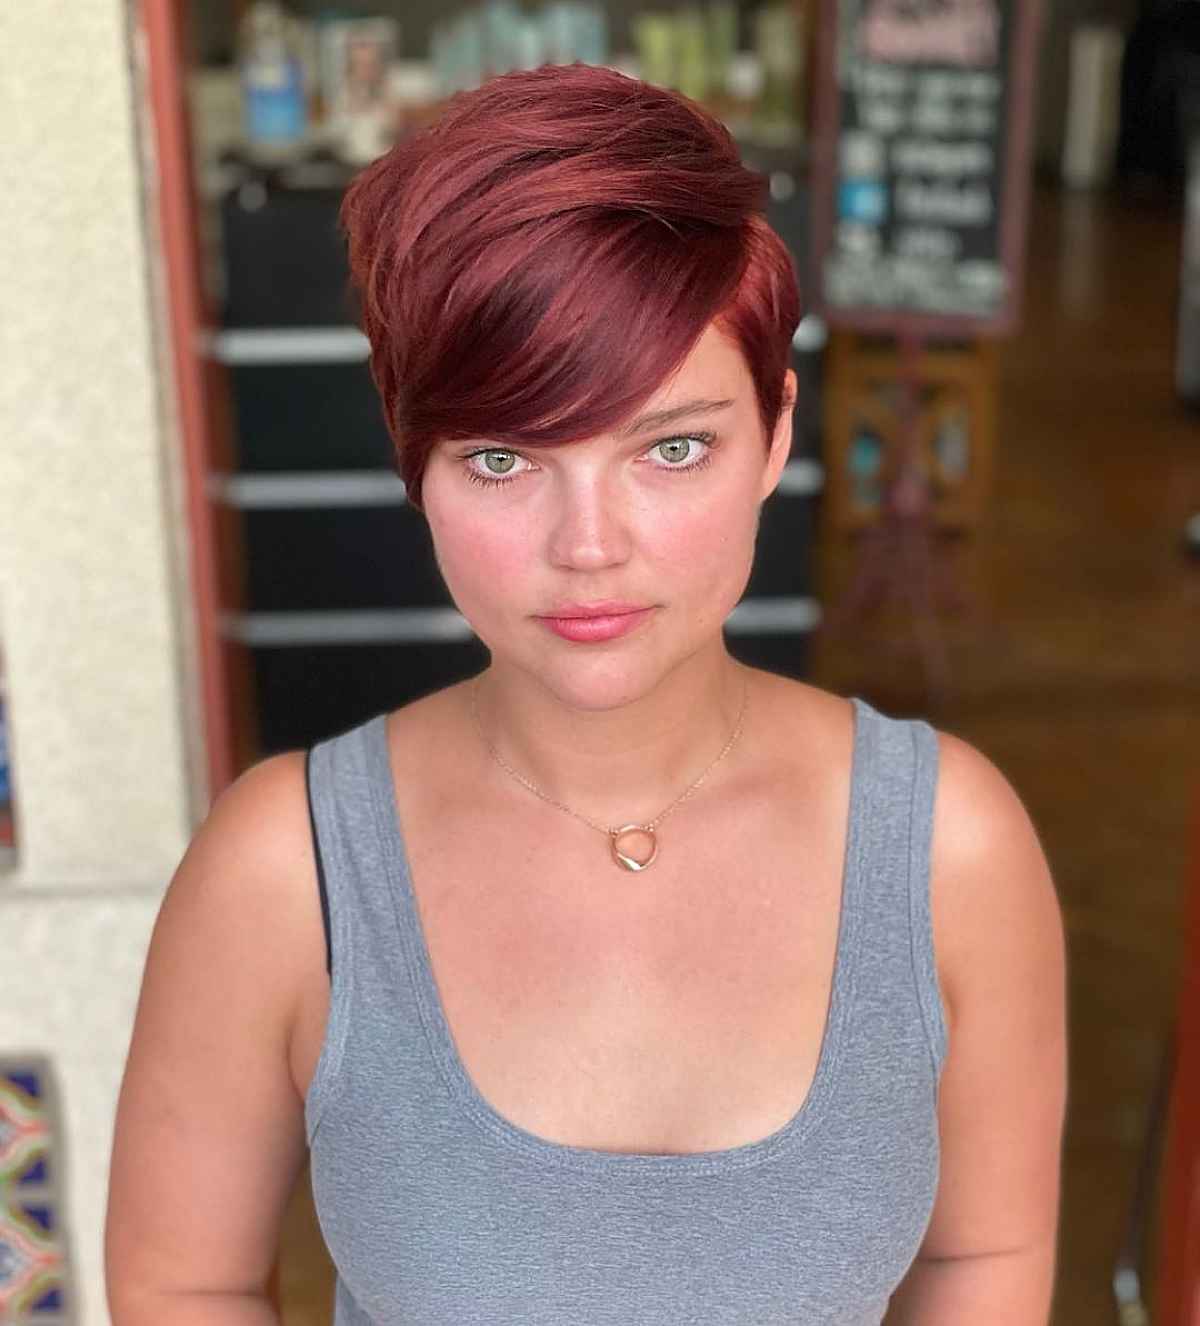 Long Side-Swept Pixie Cut for Square Faces